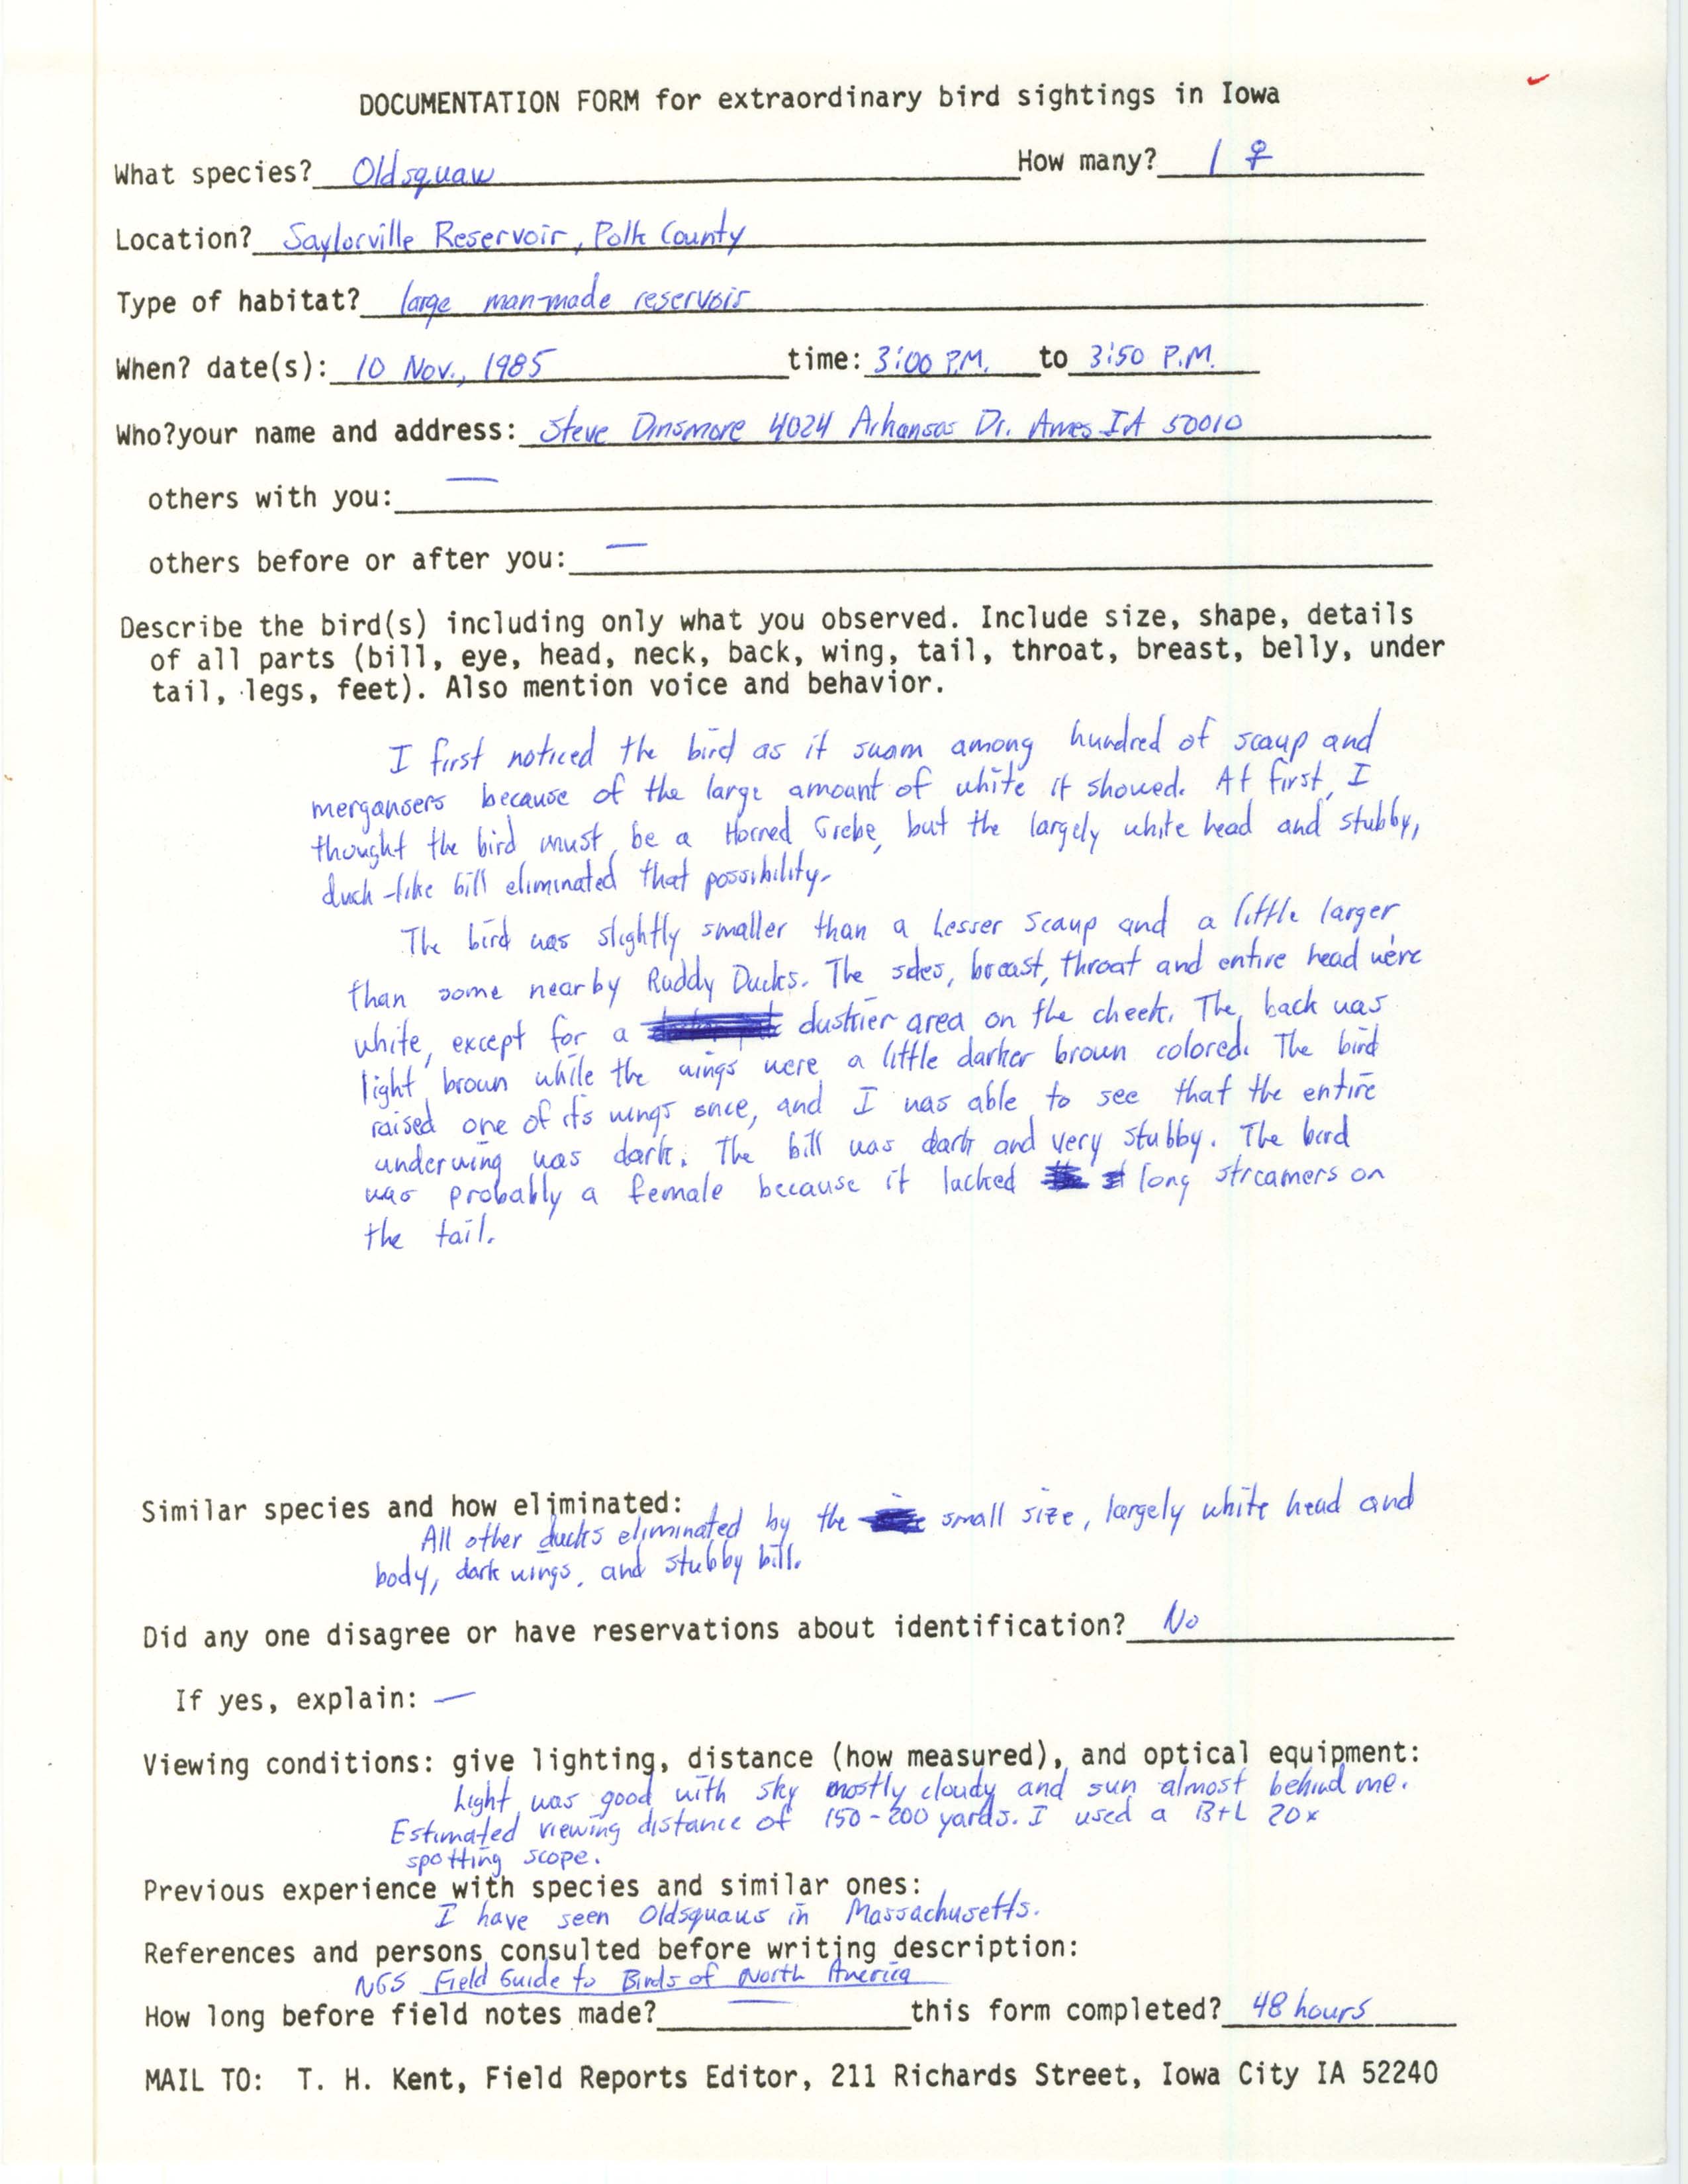 Rare bird documentation form for Long-tailed Duck at Saylorville Reservoir, 1985